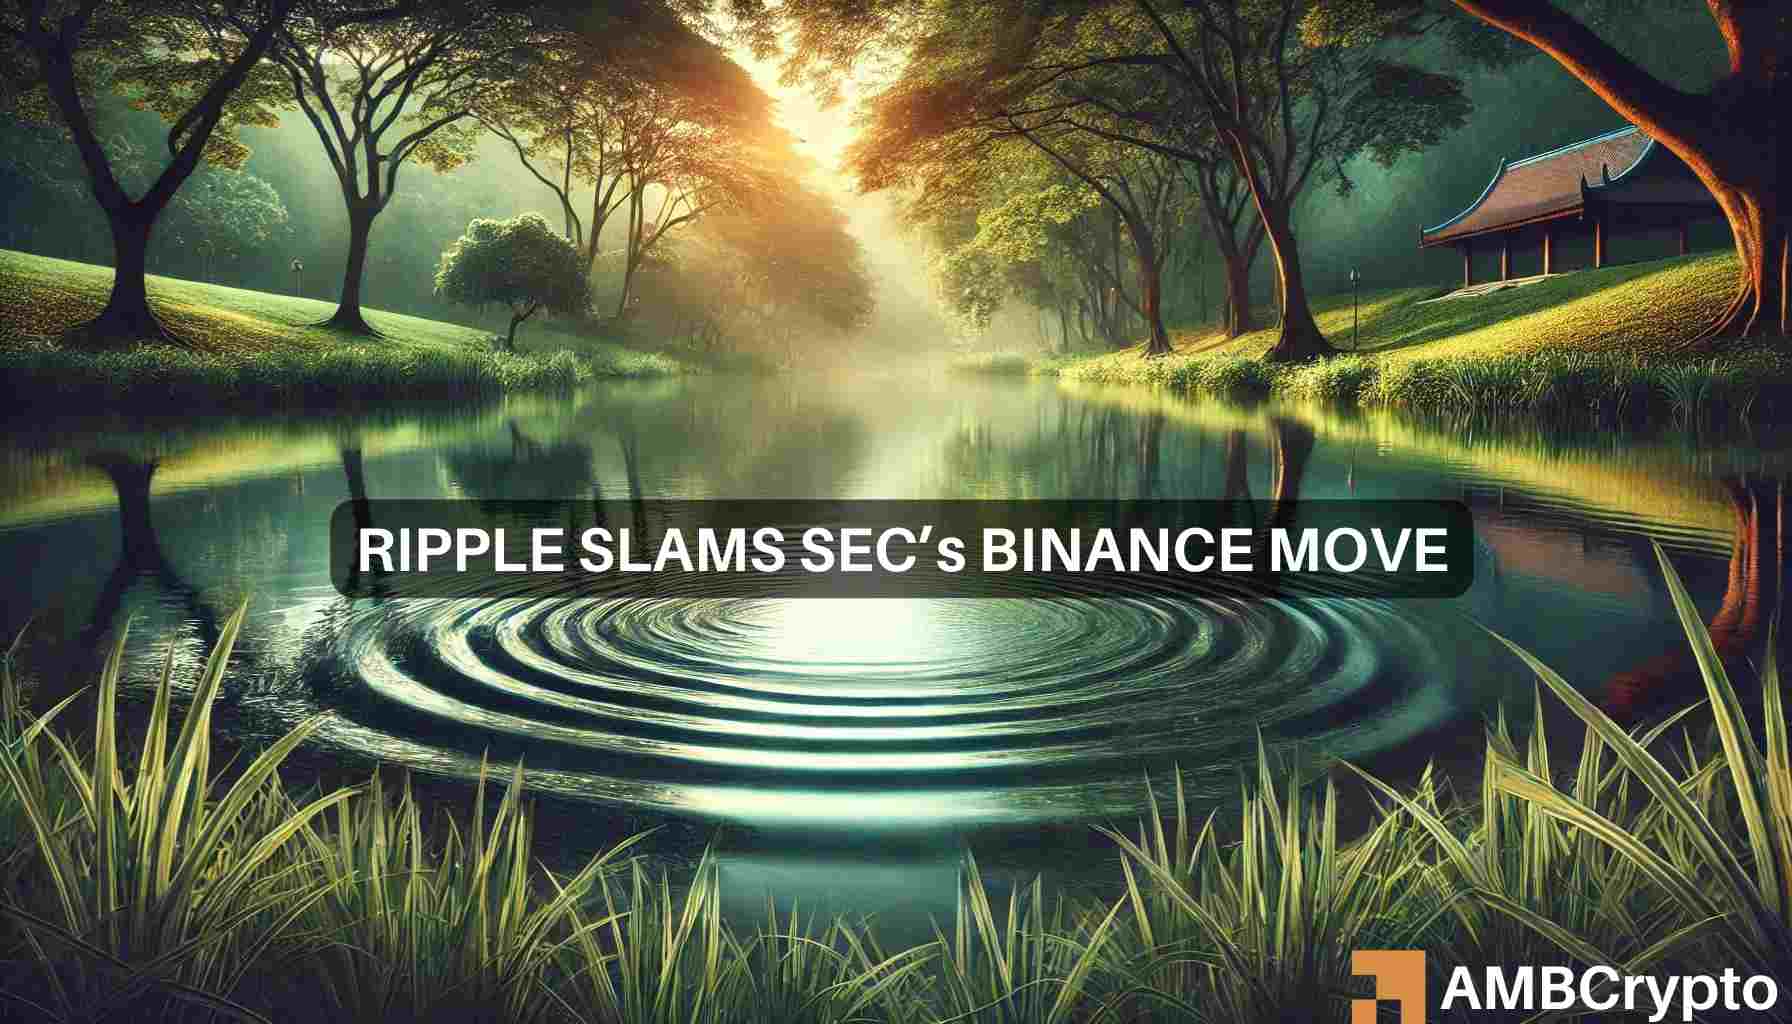 Solana, Cardano ‘left out to dry’ in SEC-Binance case, claim Ripple execs